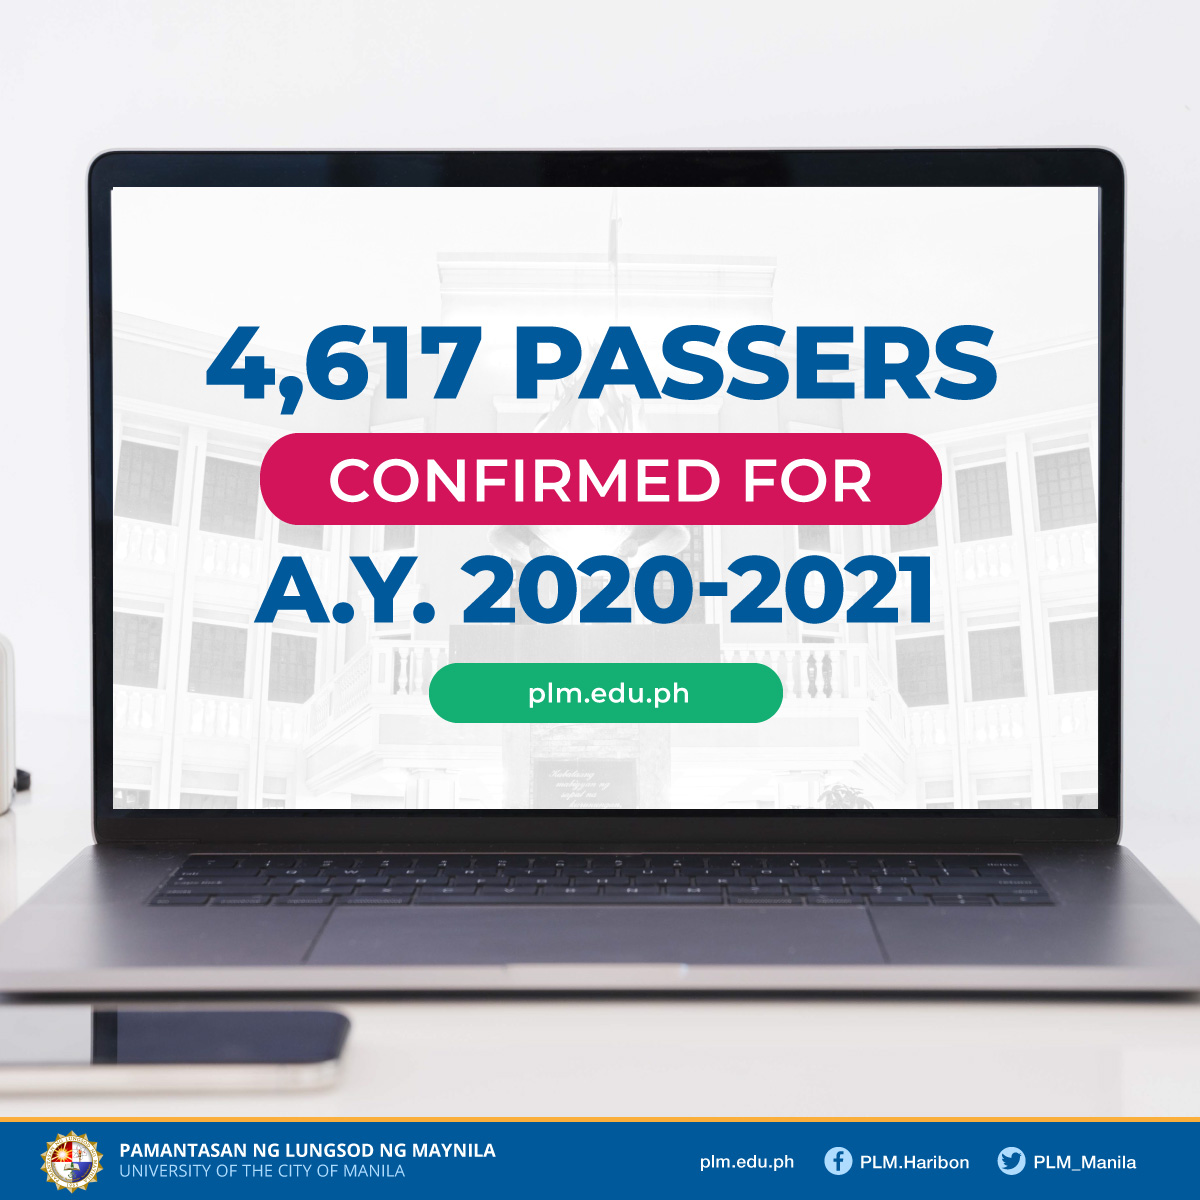 4,617 passers confirmed for Academic Year 2020-2021